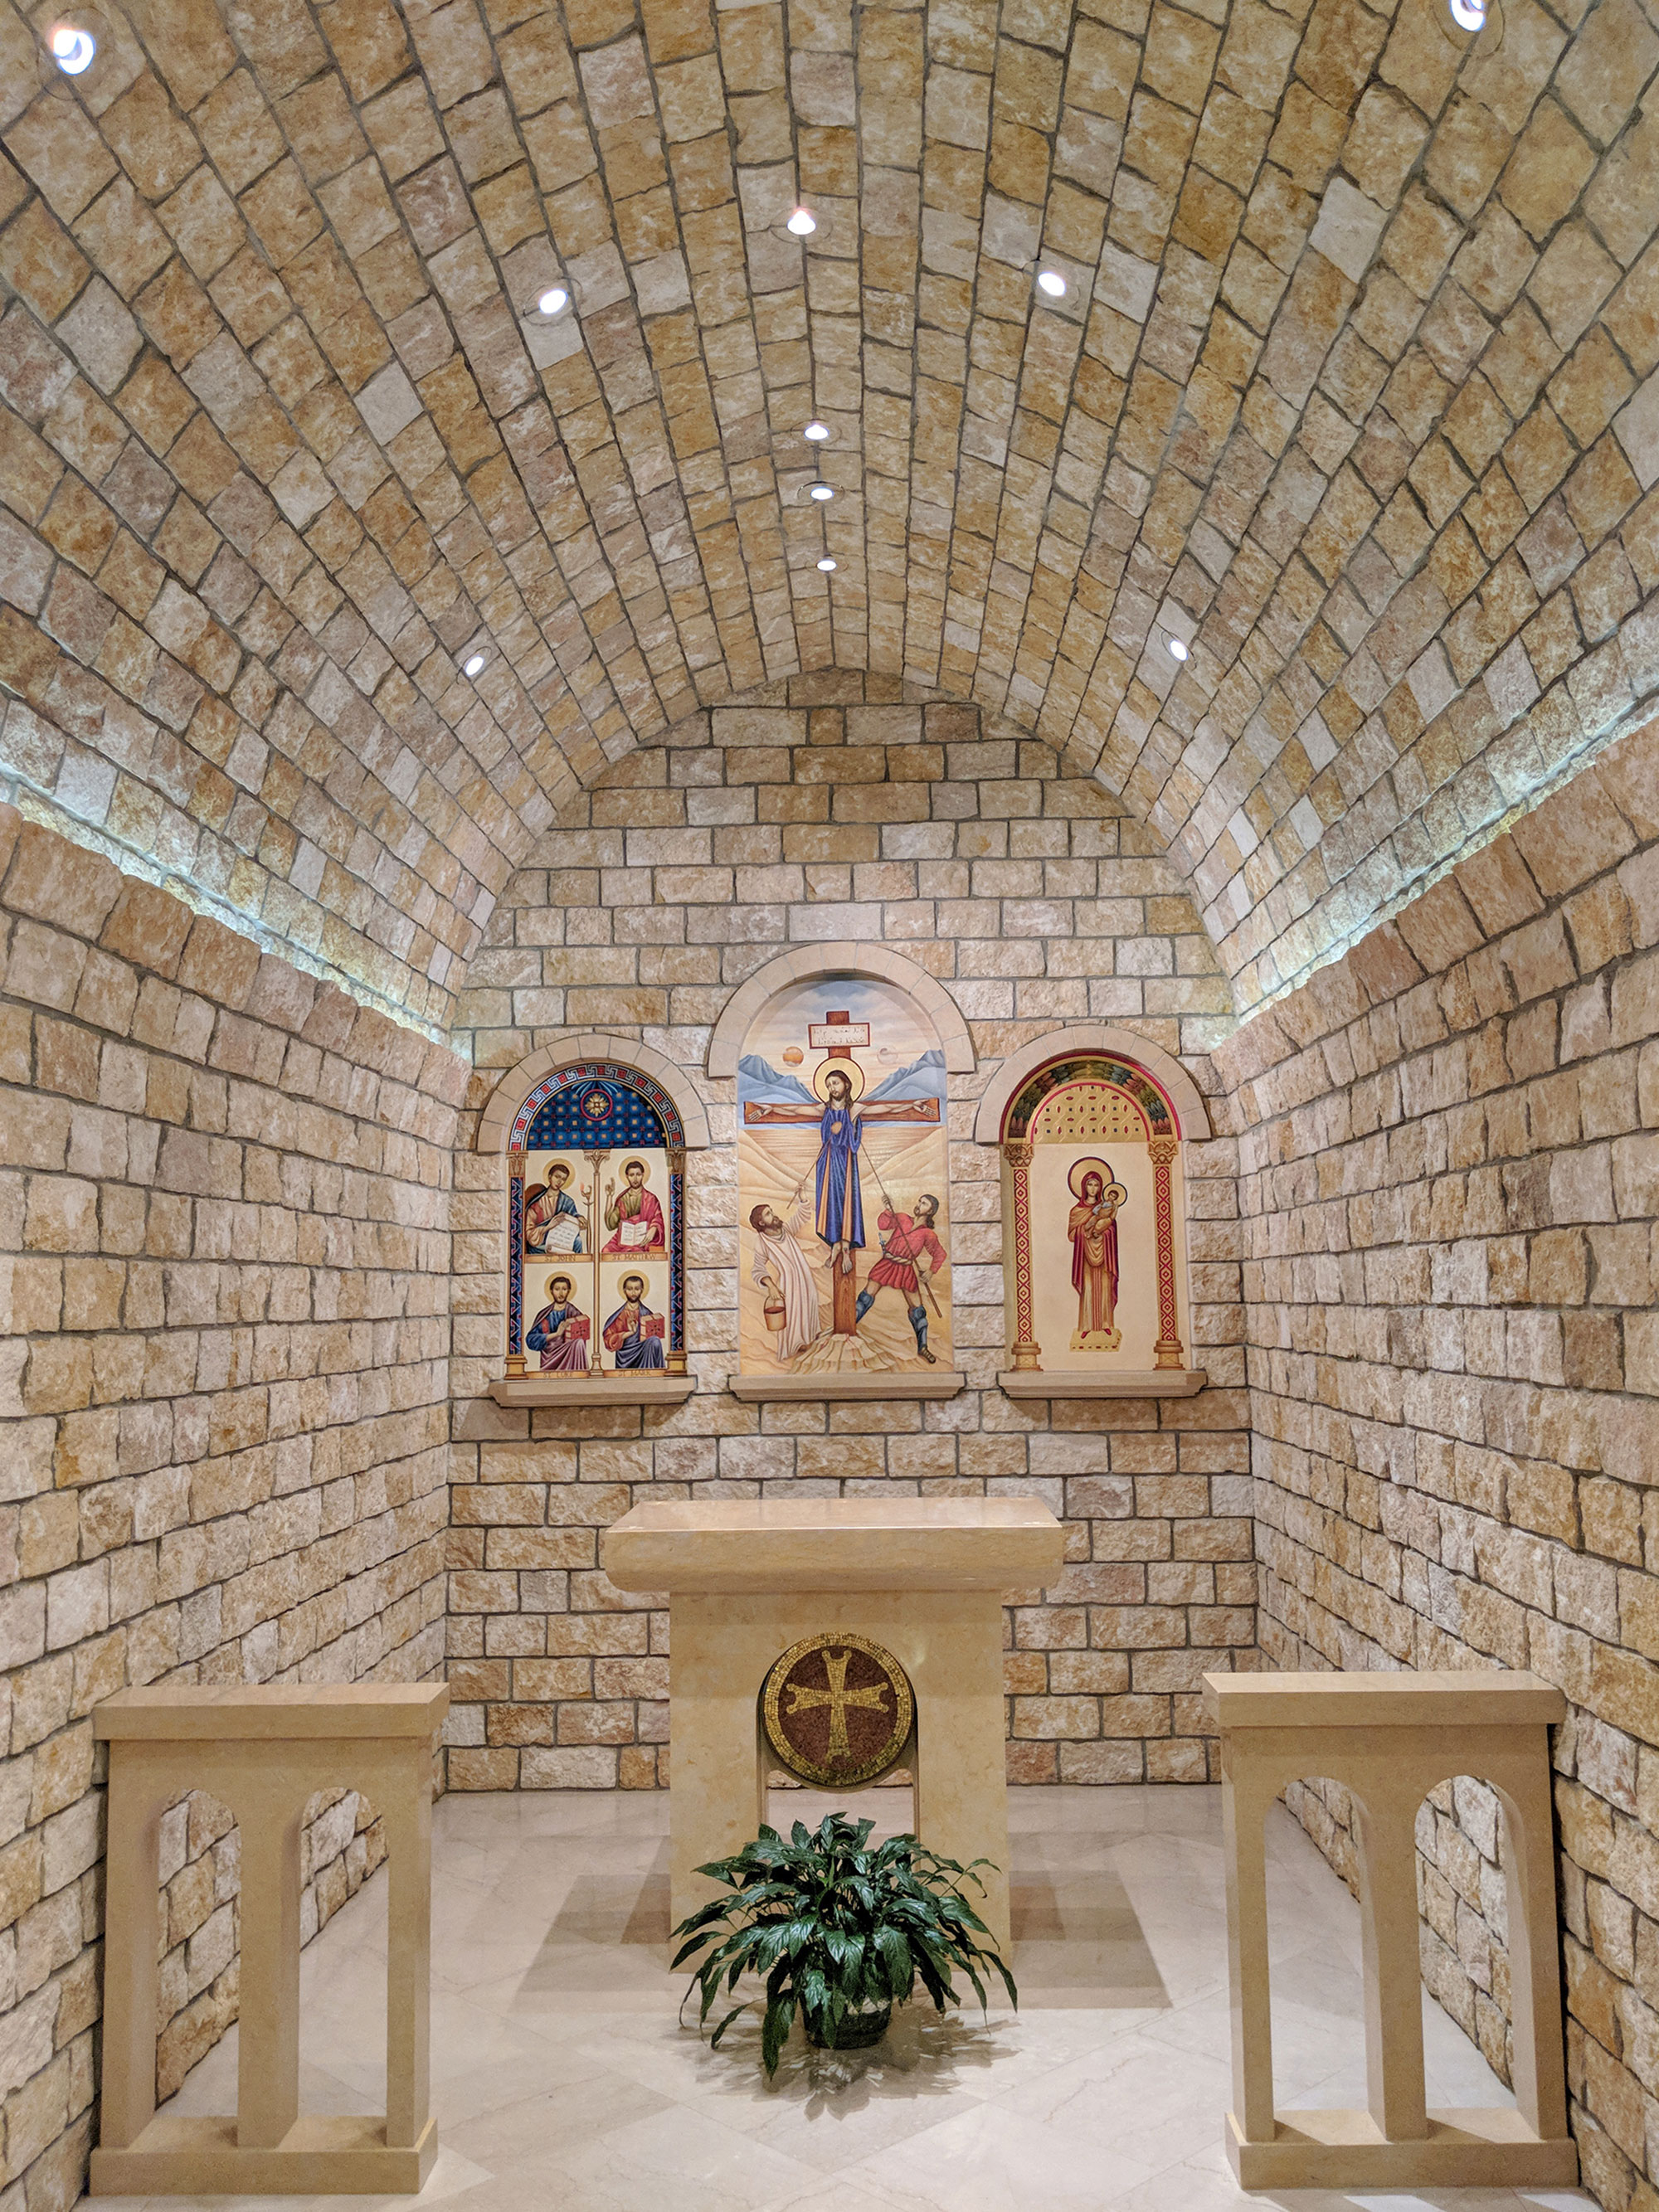 Memorial Hall in the crypt of the National Shrine of the Immaculate Conception in Washington D.C. 